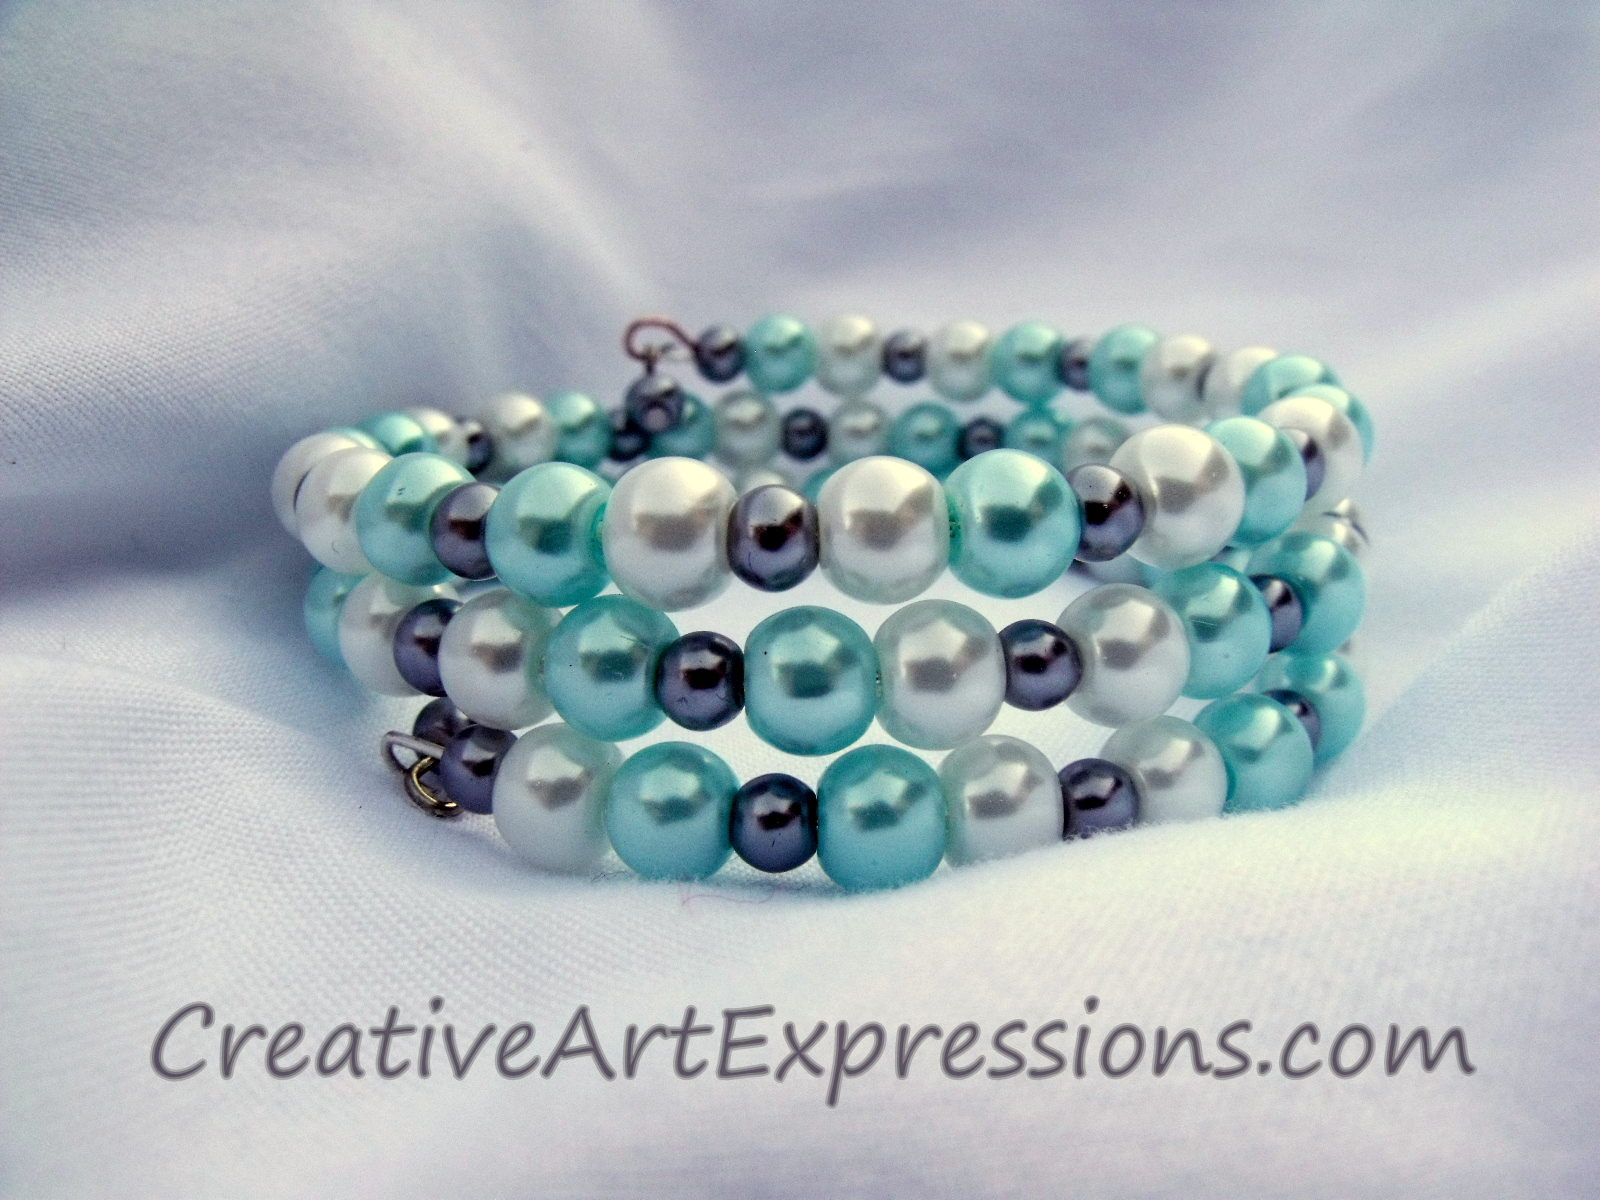 Creative Art Expressions Handmade Blue Silver & White Glass Pearl Memory Wire Bracelet Jewelry Design